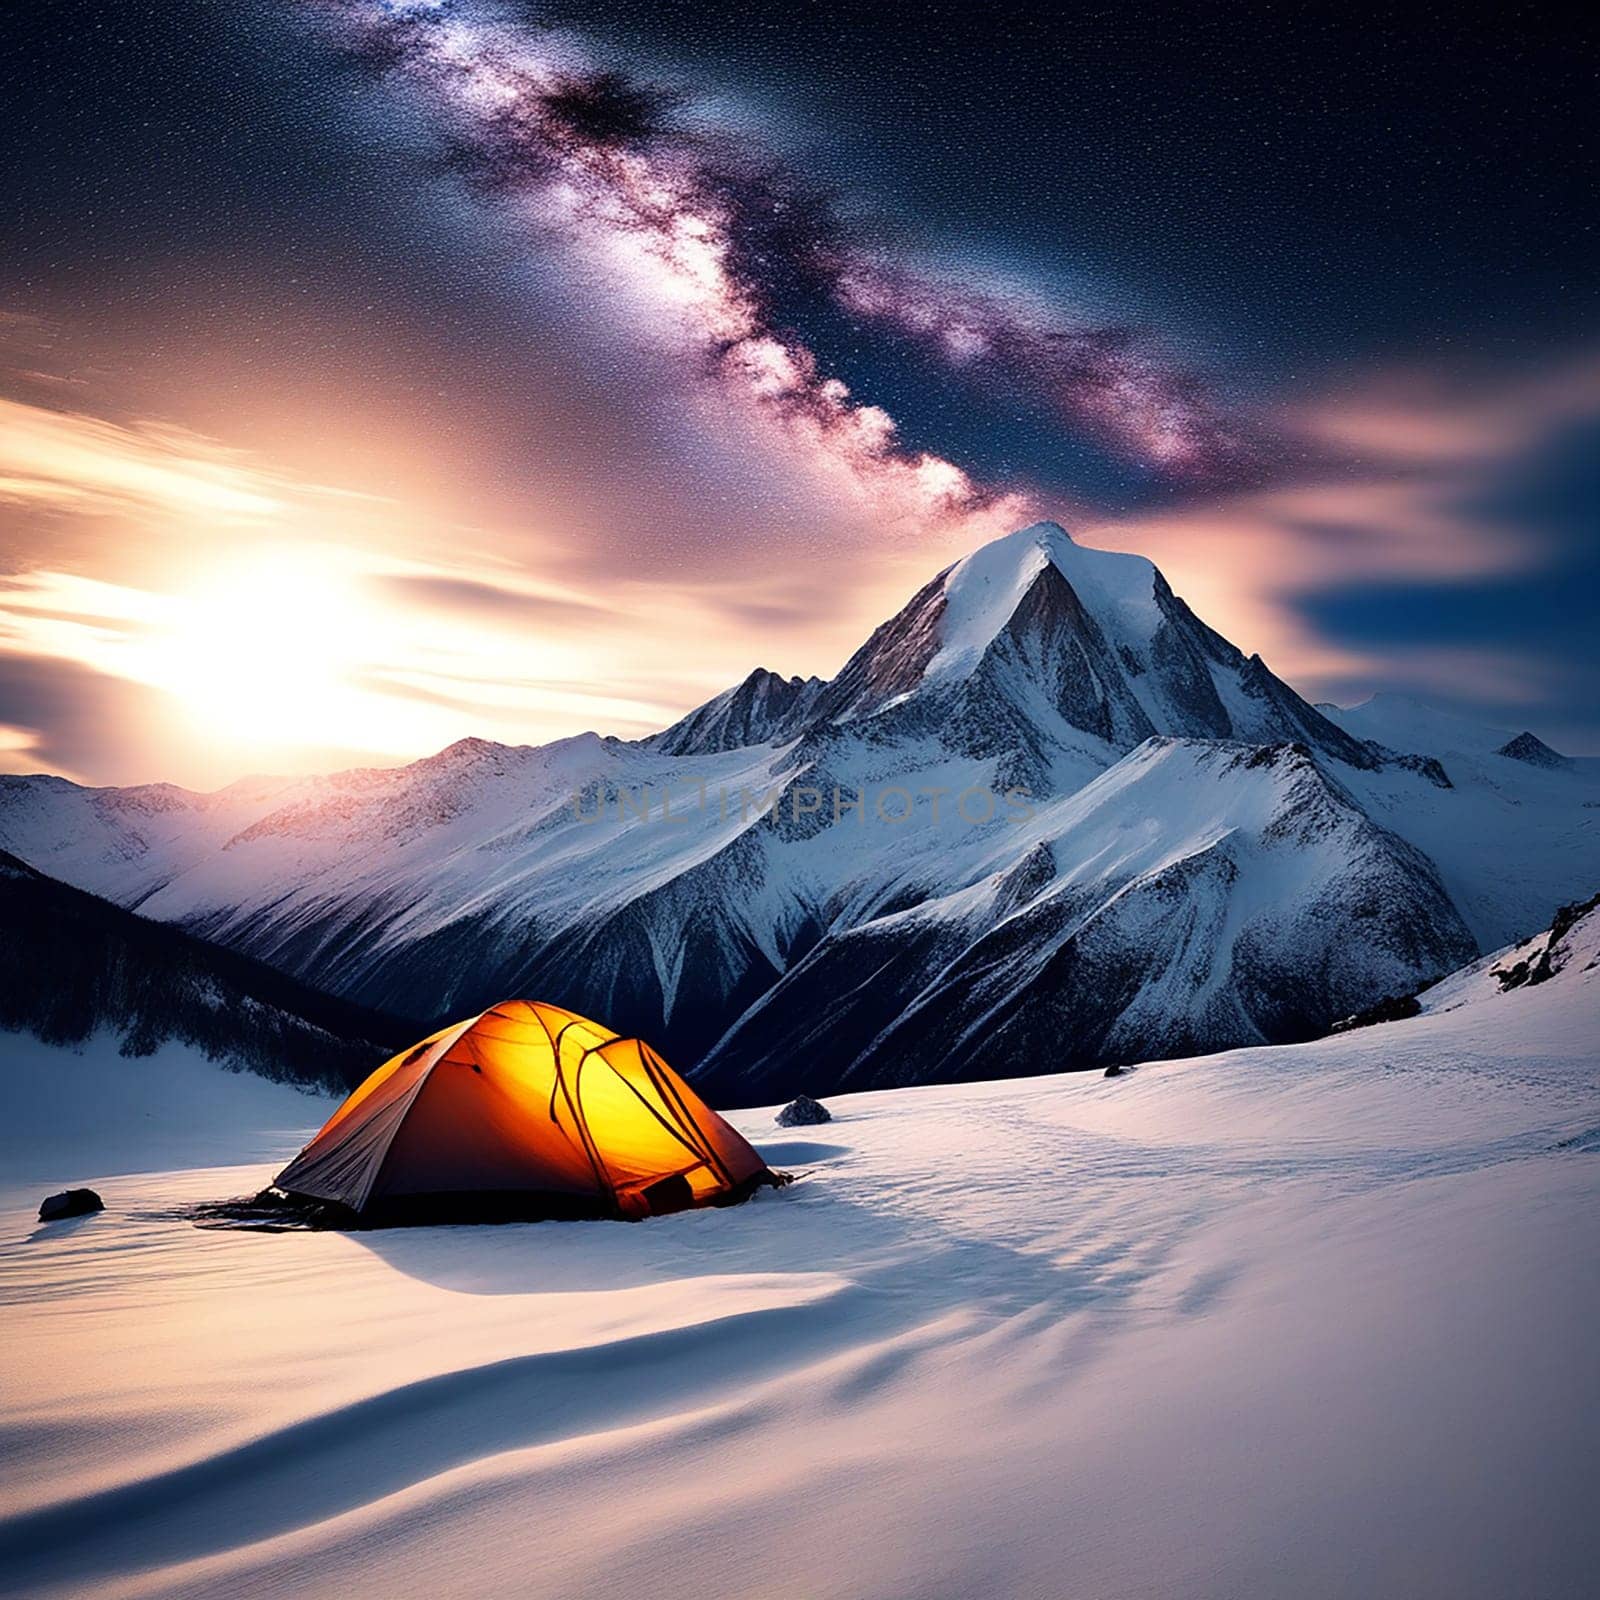 Celestial Camping: Embracing the Milky Way Galaxy in the Majestic Mountains by Petrichor